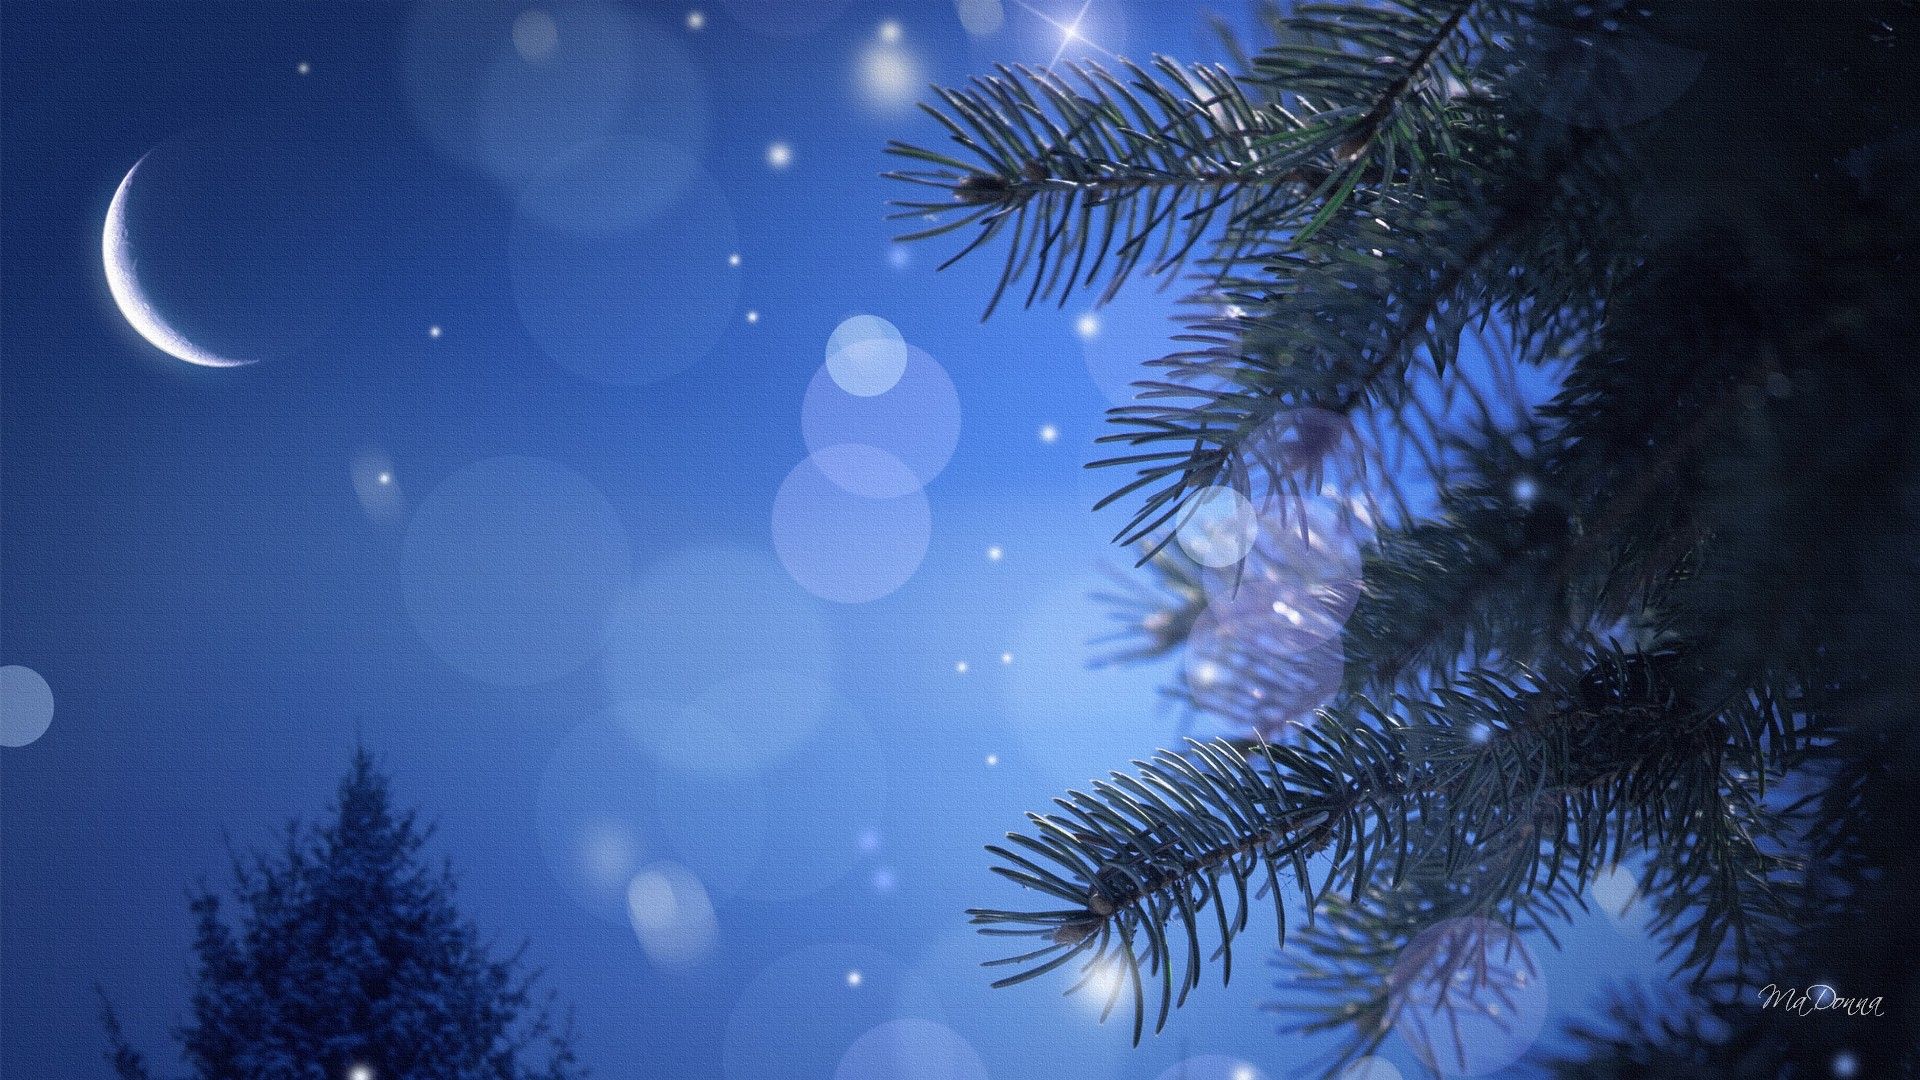 HD Calm Winter Night Wallpaper. Download Free -109213 4K of Wallpaper for Andriod